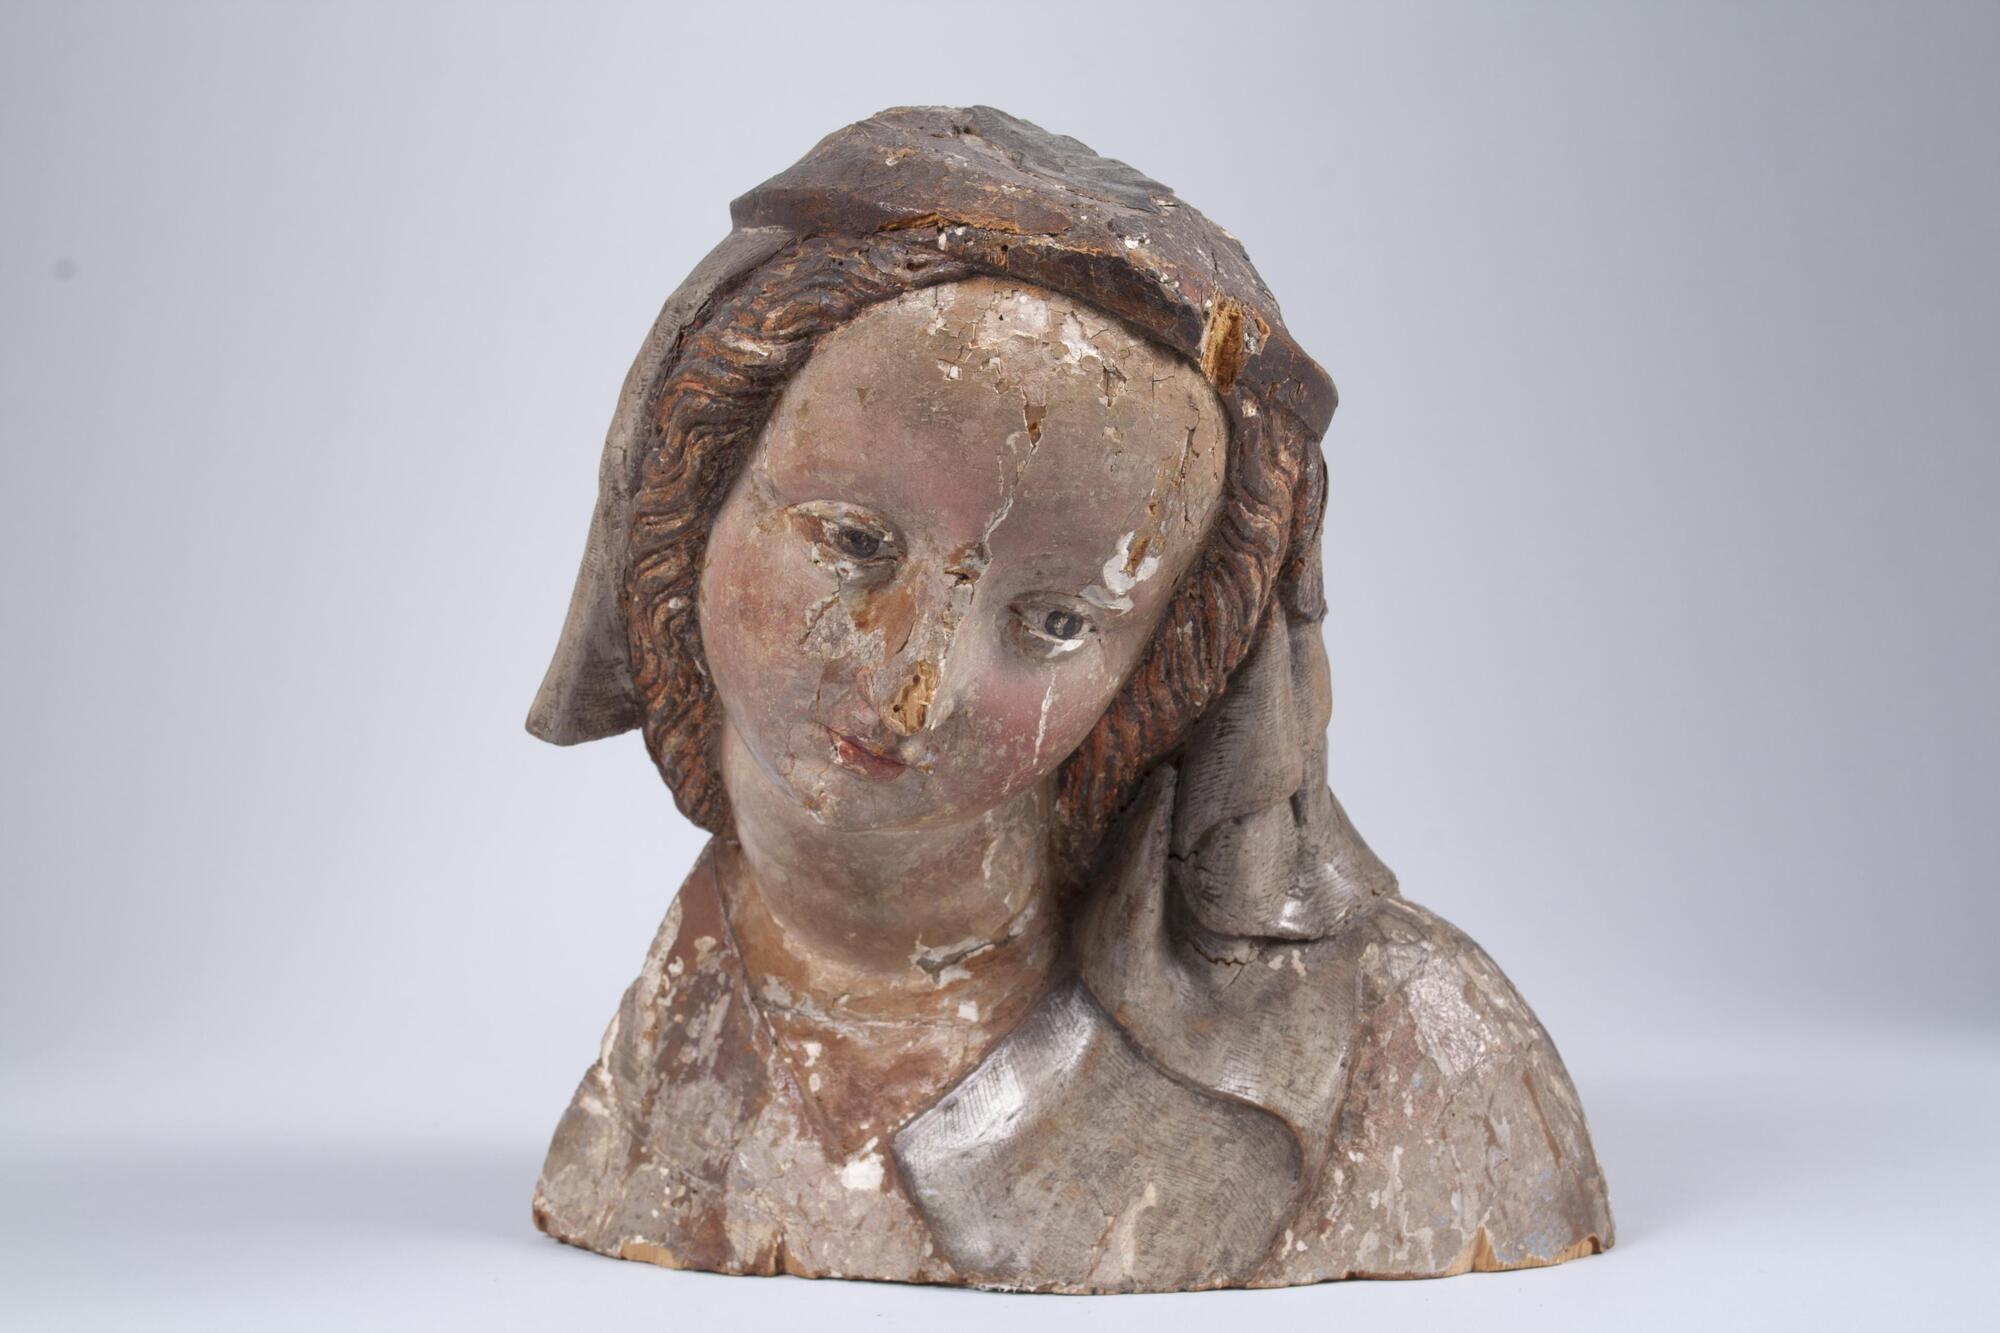 Bust of Madonna with head facing down and to the side. The main sculpture is of wood with layers of paint on the face and veil.